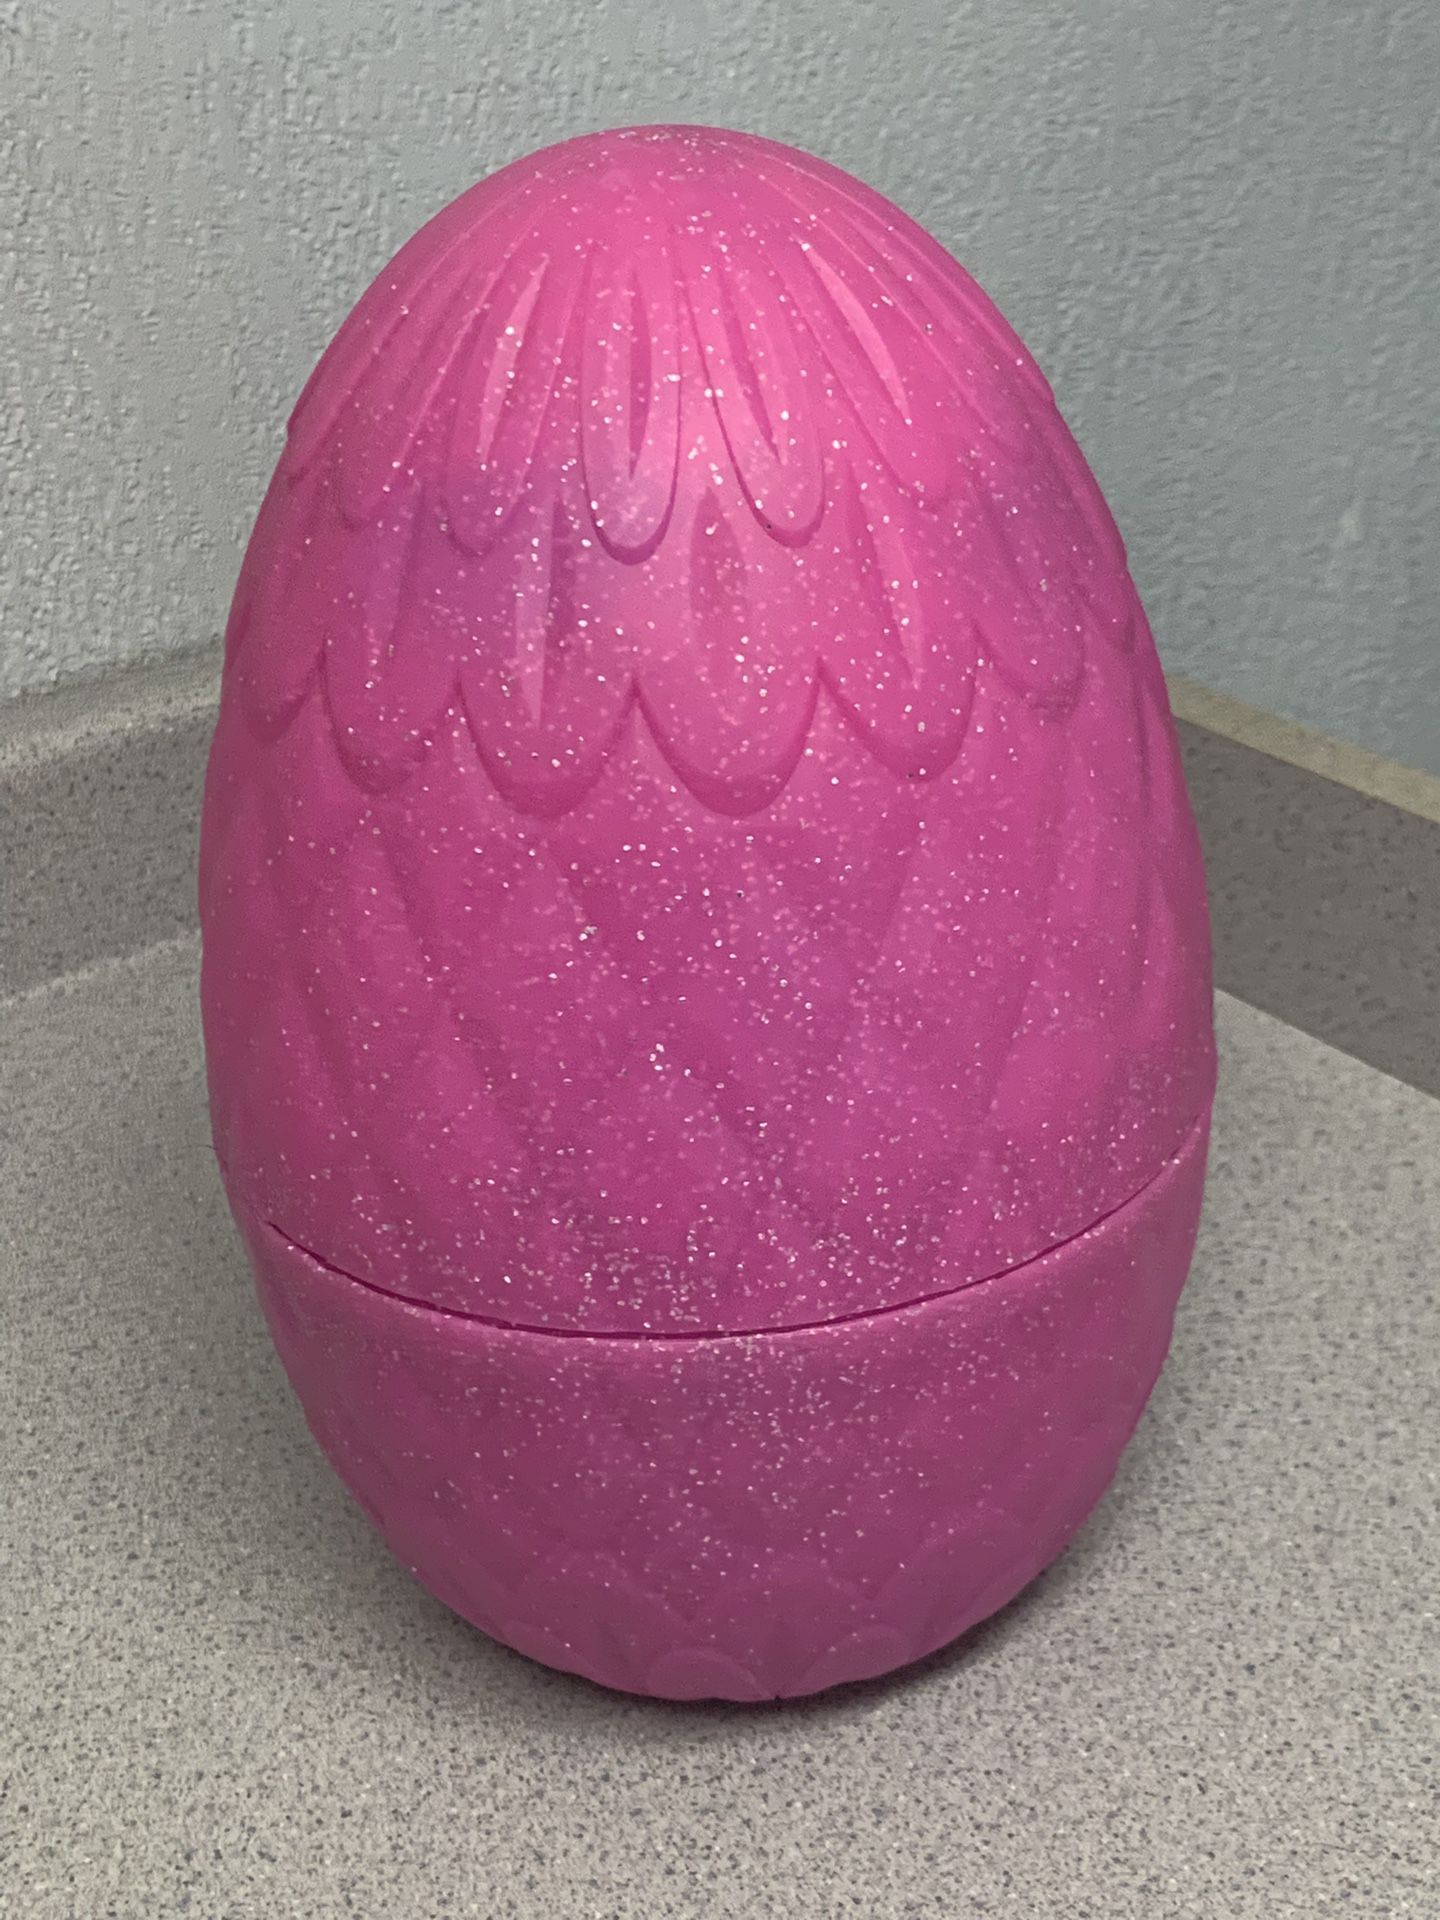 Hatchimals WOW Llalacorn Interactive Pink Llama - Grows to 32 tall No Egg  for Sale in Staten Island, NY - OfferUp